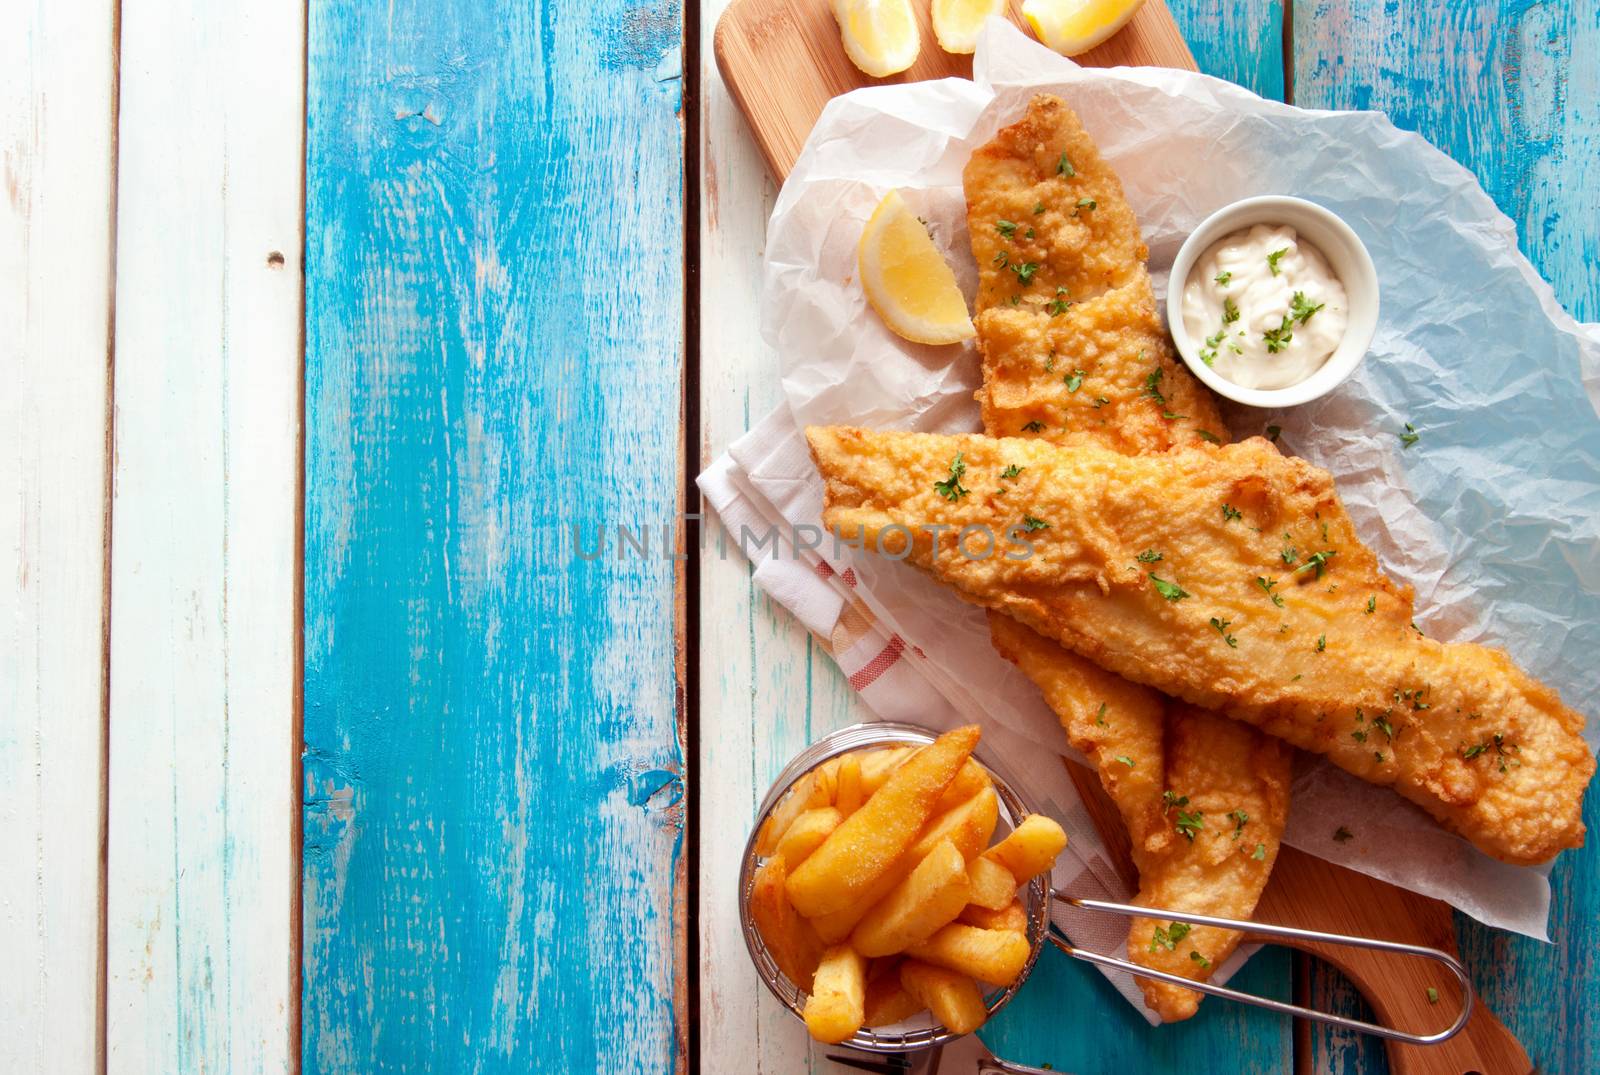 Traditional battered fried fish with chips